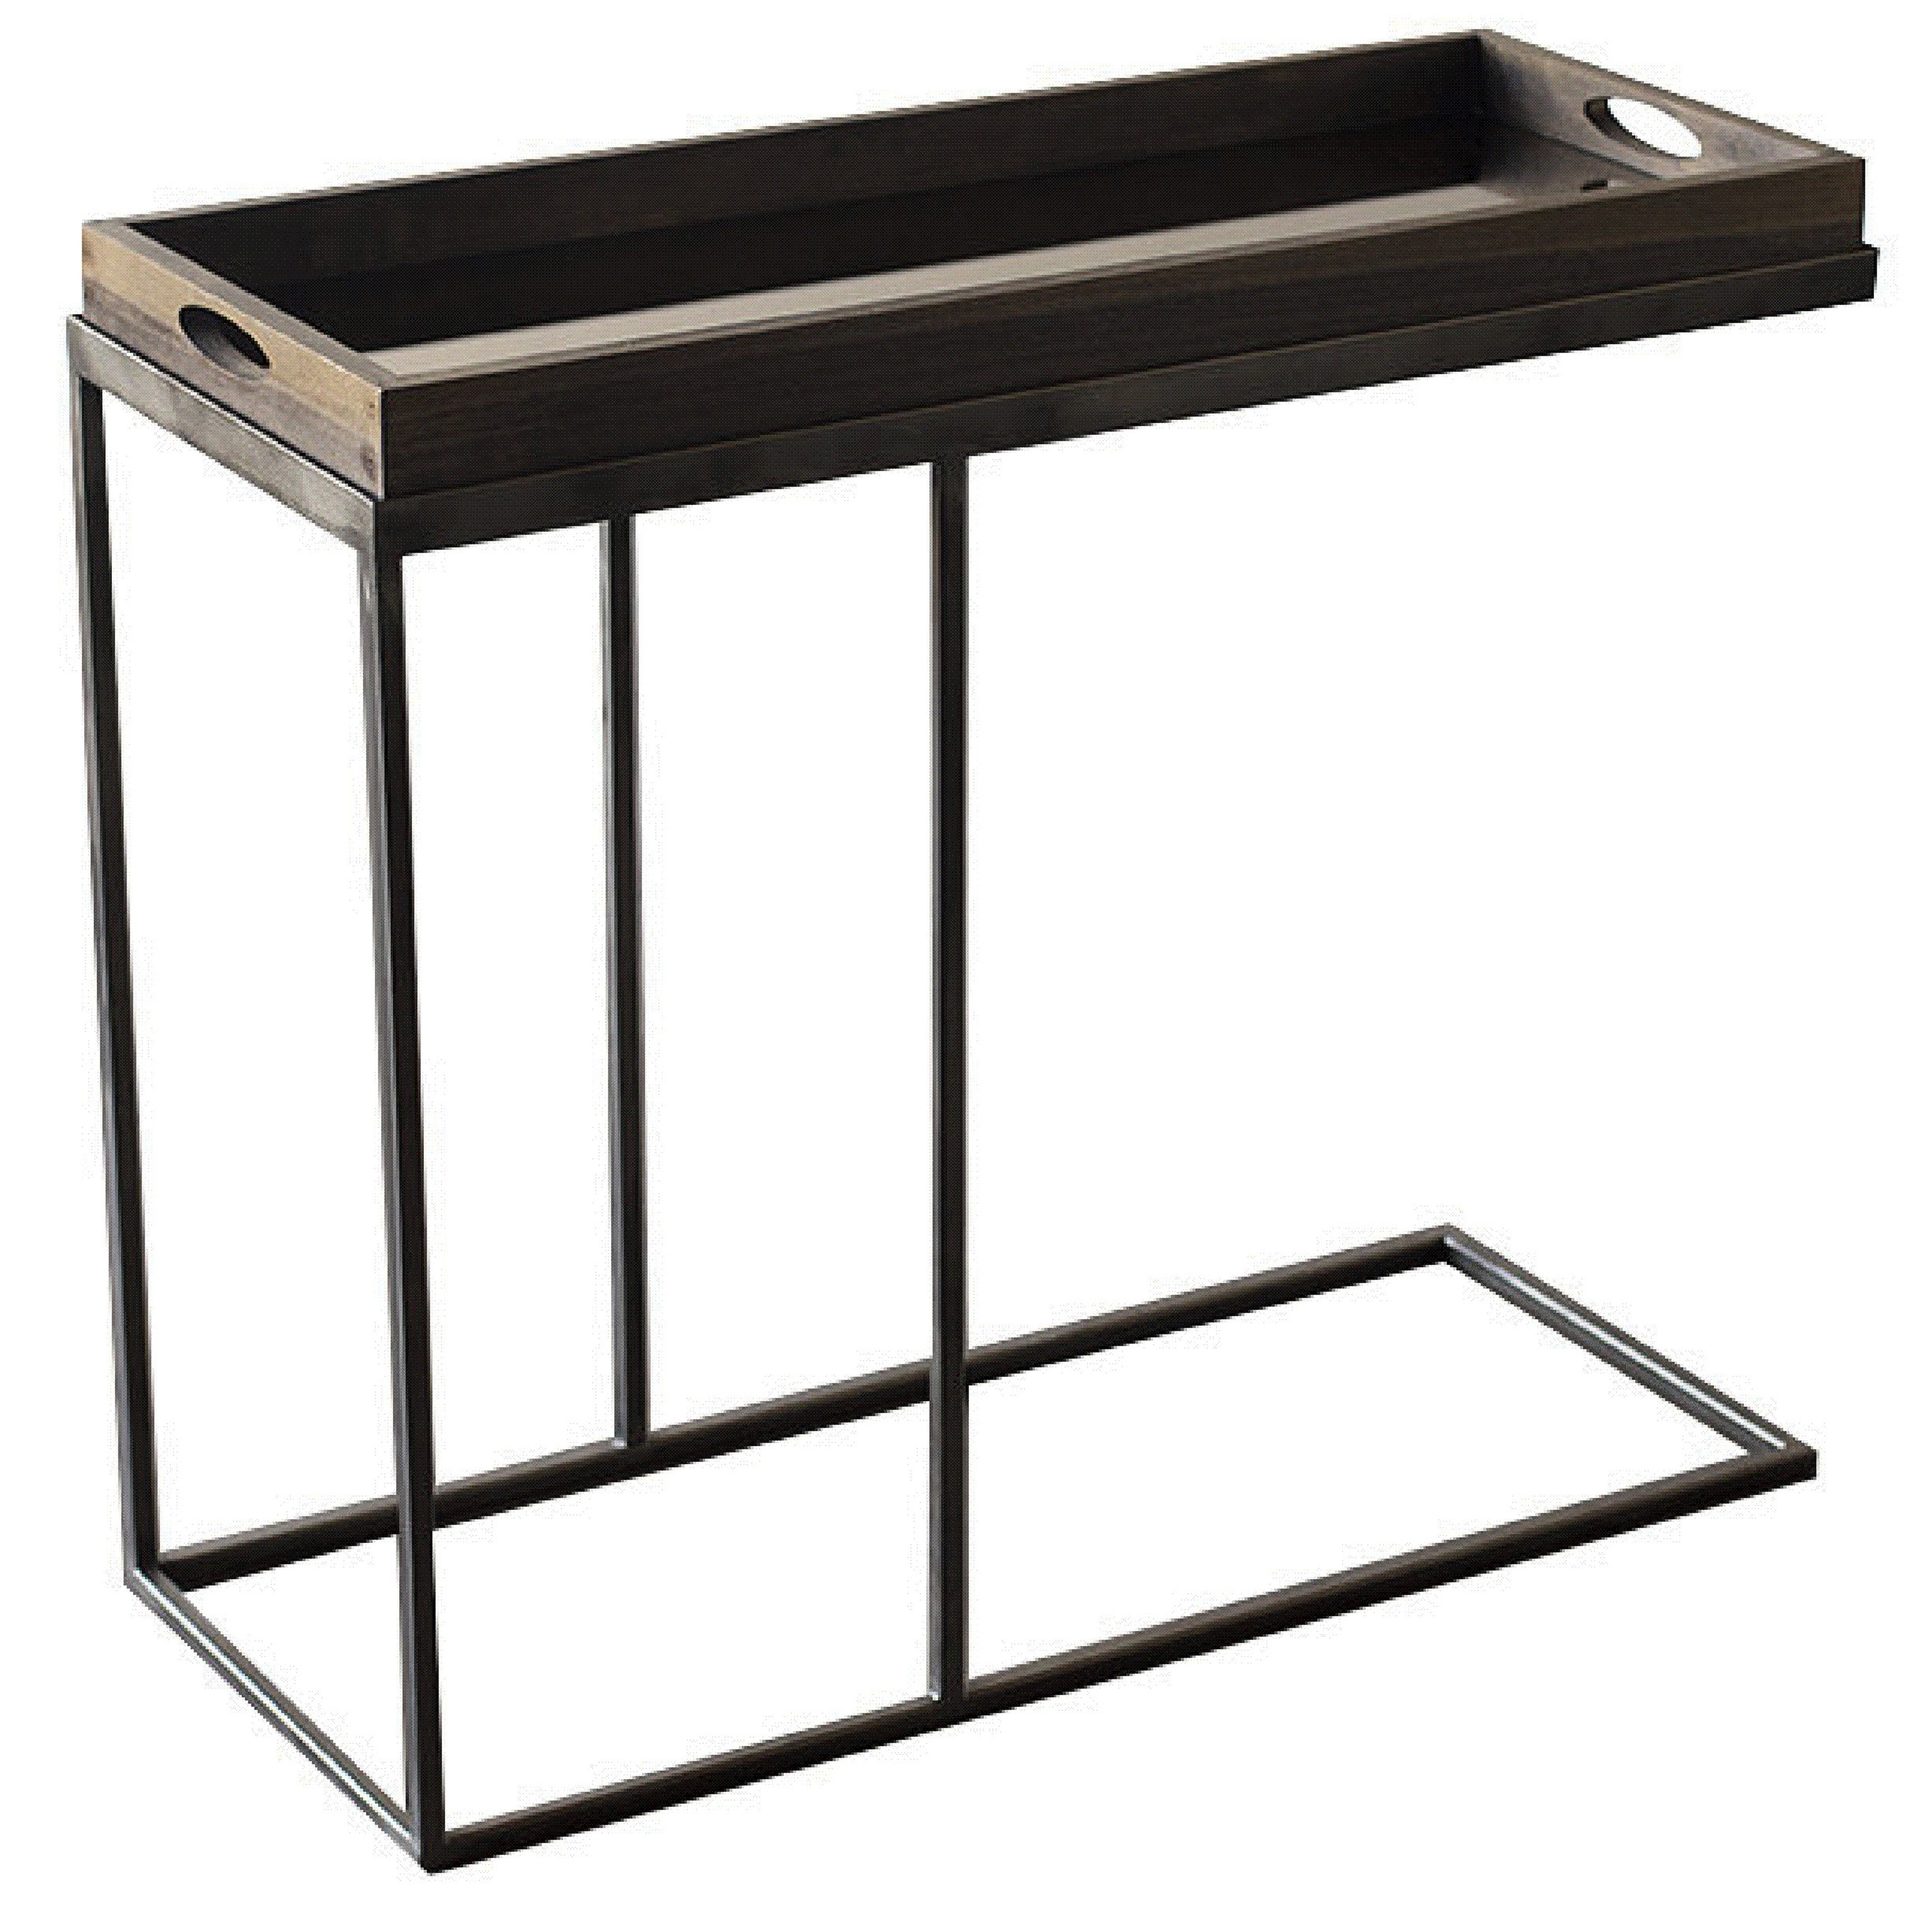 Rectangular Tray Side Table (Tray Not Included)